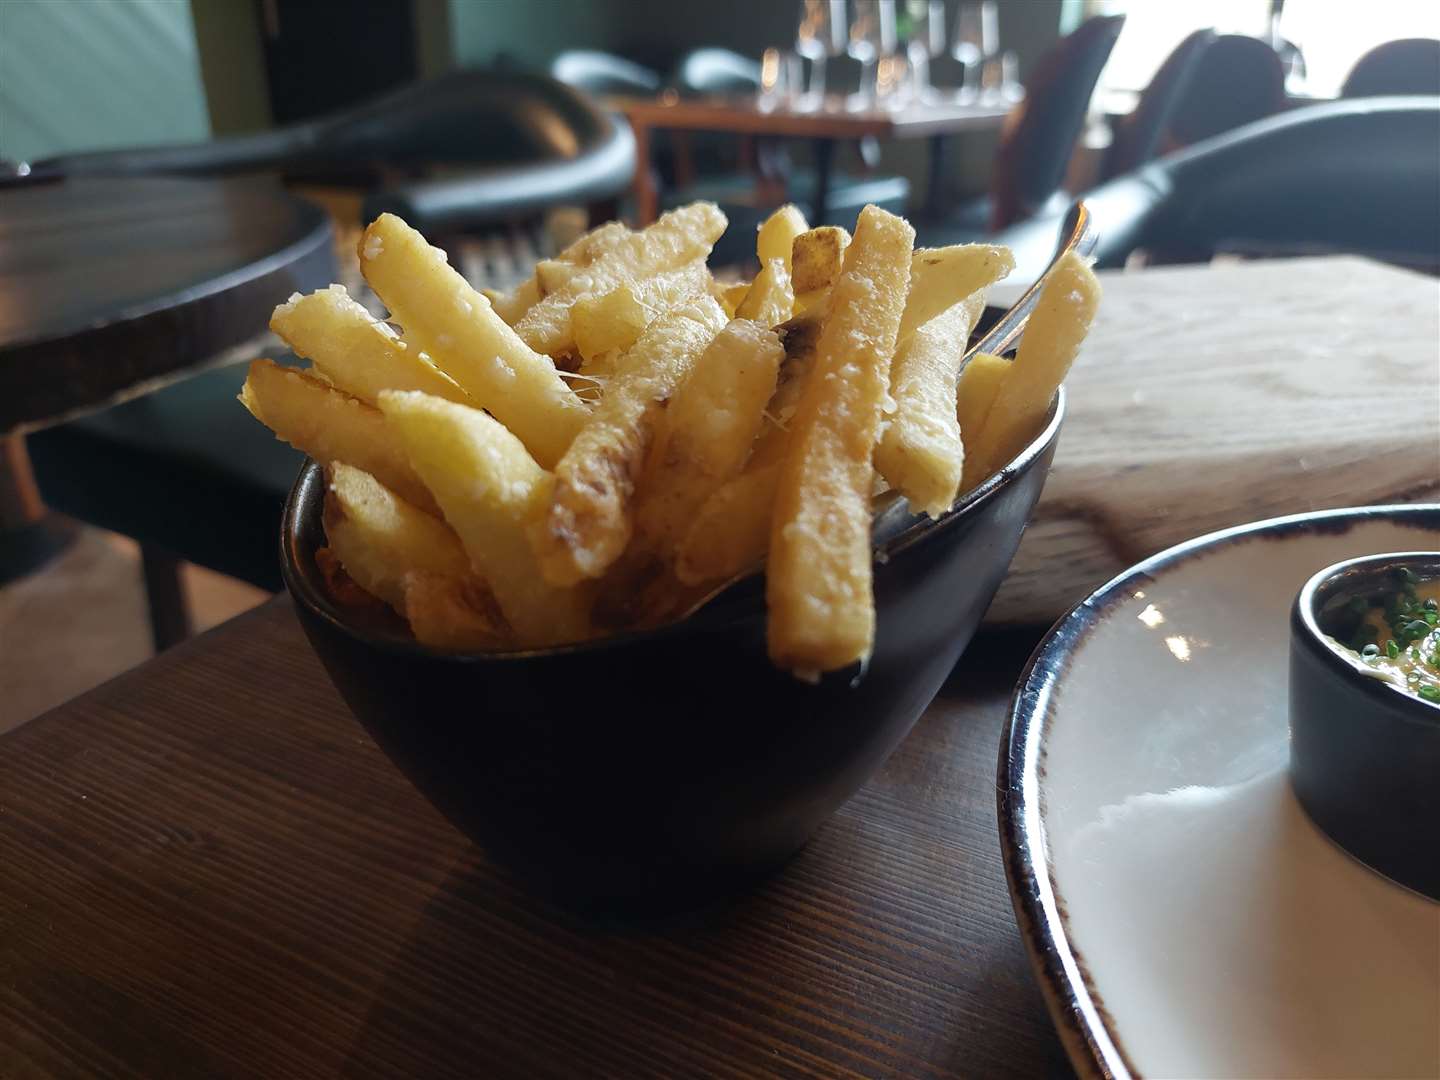 The portion of chips was huge